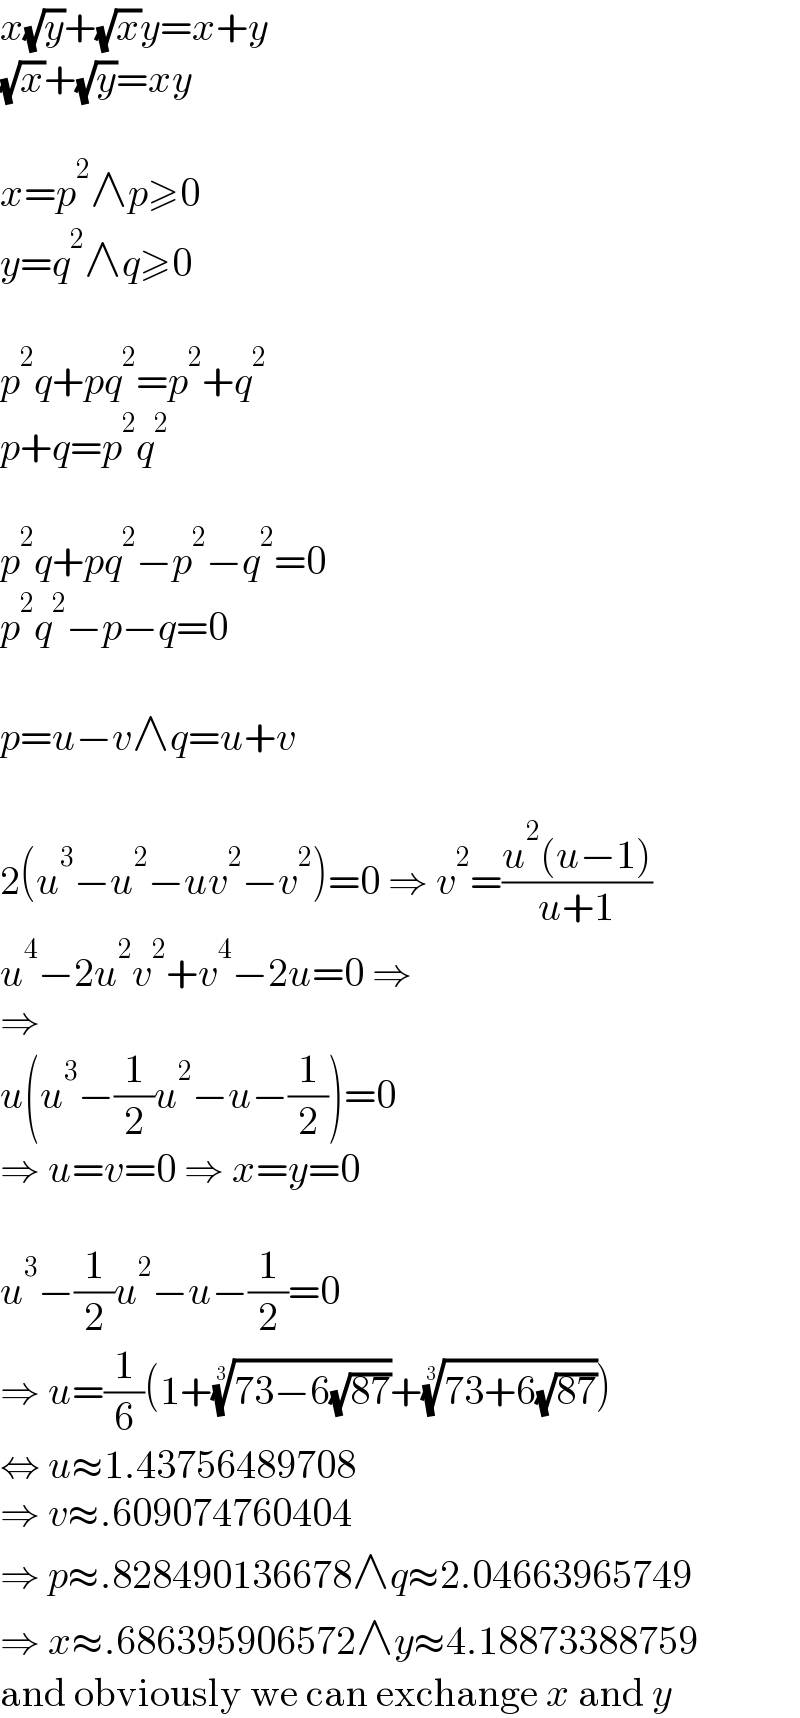 x(√y)+(√x)y=x+y  (√x)+(√y)=xy    x=p^2 ∧p≥0  y=q^2 ∧q≥0    p^2 q+pq^2 =p^2 +q^2   p+q=p^2 q^2     p^2 q+pq^2 −p^2 −q^2 =0  p^2 q^2 −p−q=0    p=u−v∧q=u+v    2(u^3 −u^2 −uv^2 −v^2 )=0 ⇒ v^2 =((u^2 (u−1))/(u+1))  u^4 −2u^2 v^2 +v^4 −2u=0 ⇒  ⇒  u(u^3 −(1/2)u^2 −u−(1/2))=0  ⇒ u=v=0 ⇒ x=y=0    u^3 −(1/2)u^2 −u−(1/2)=0  ⇒ u=(1/6)(1+((73−6(√(87))))^(1/3) +((73+6(√(87))))^(1/3) )  ⇔ u≈1.43756489708  ⇒ v≈.609074760404  ⇒ p≈.828490136678∧q≈2.04663965749  ⇒ x≈.686395906572∧y≈4.18873388759  and obviously we can exchange x and y  